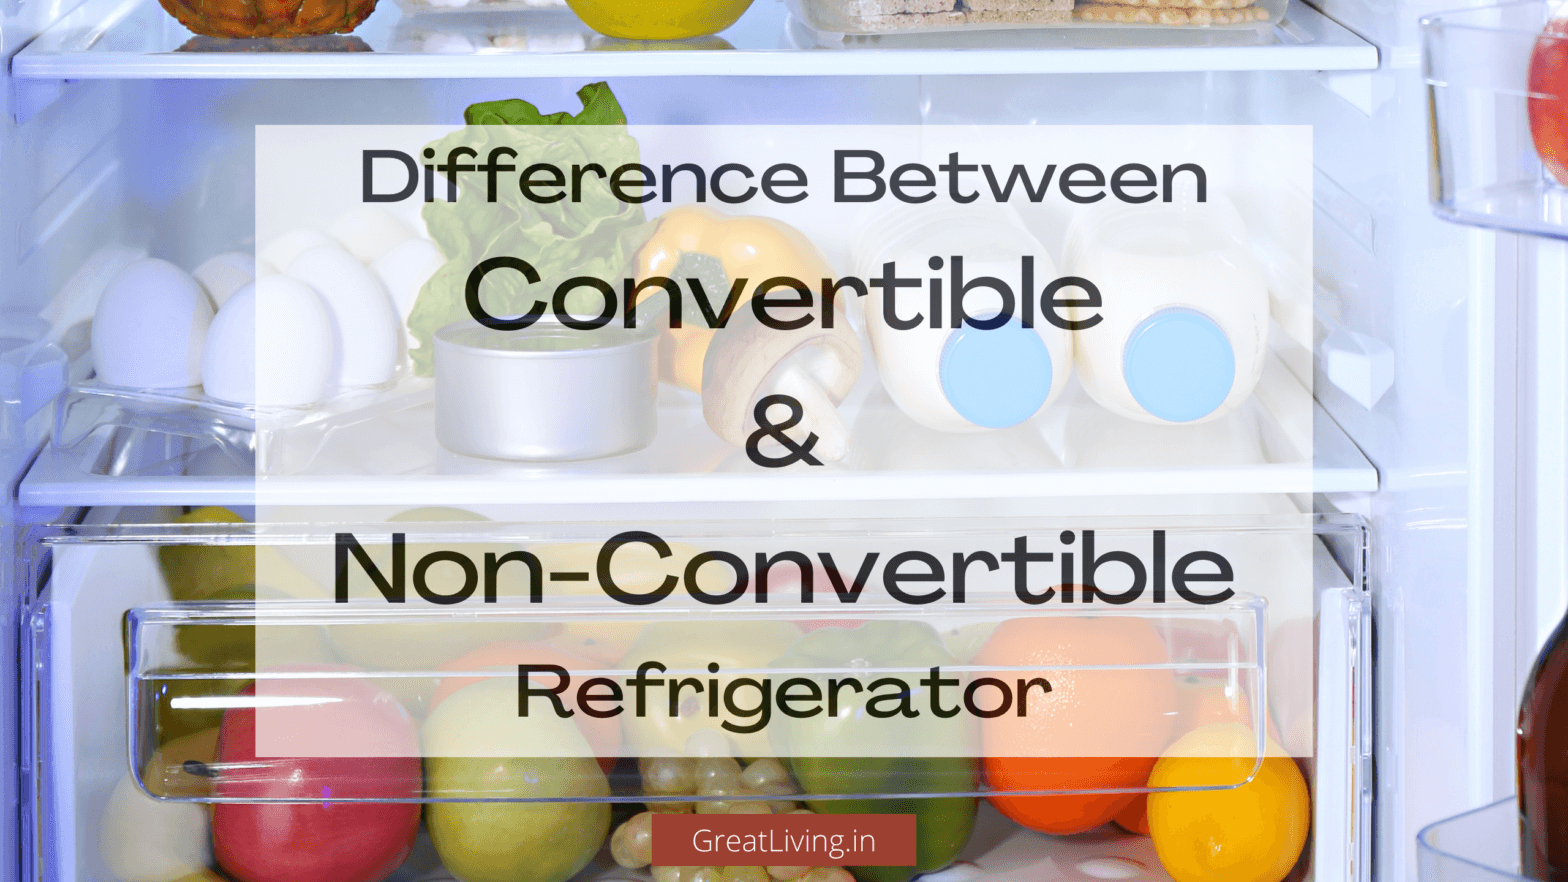 Difference Between Convertible & Non-Convertible Refrigerator